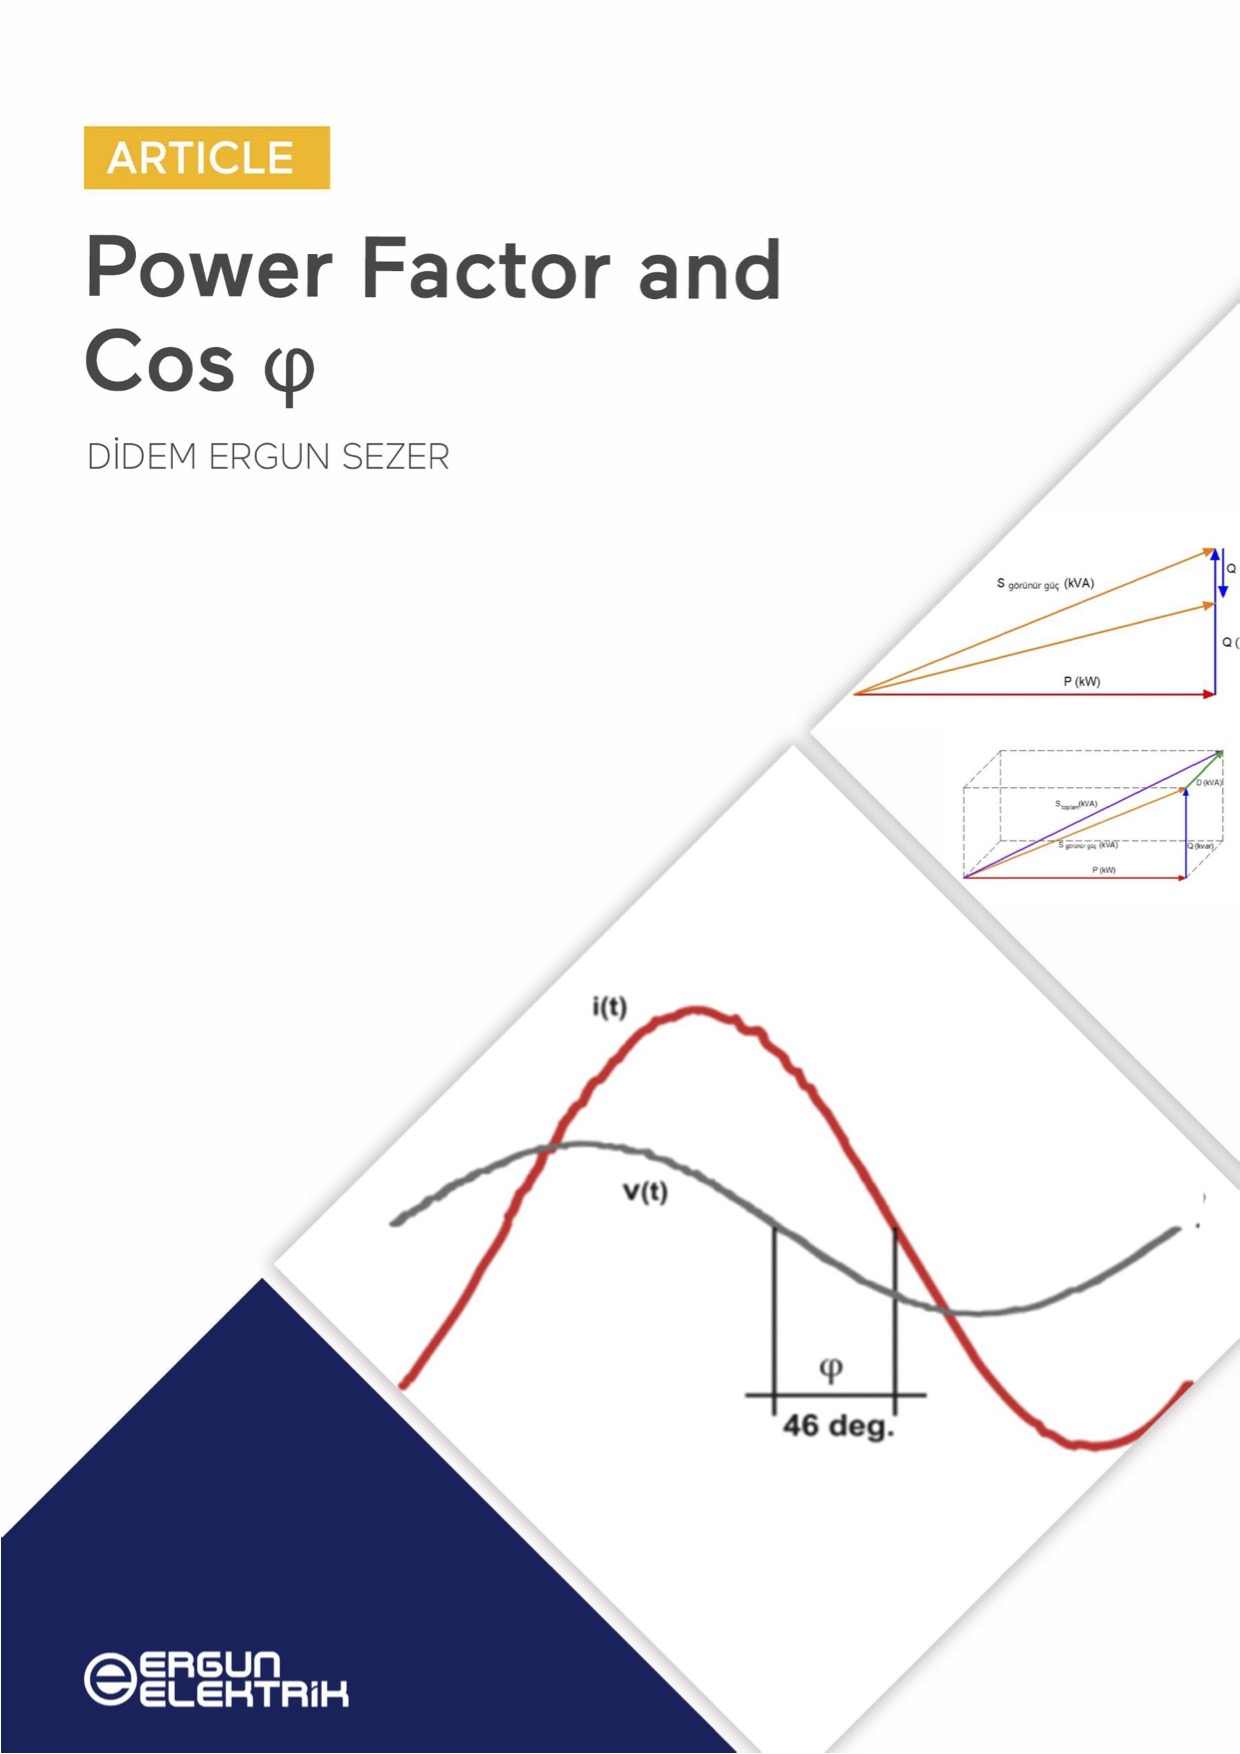 Power Factor and Cos φ